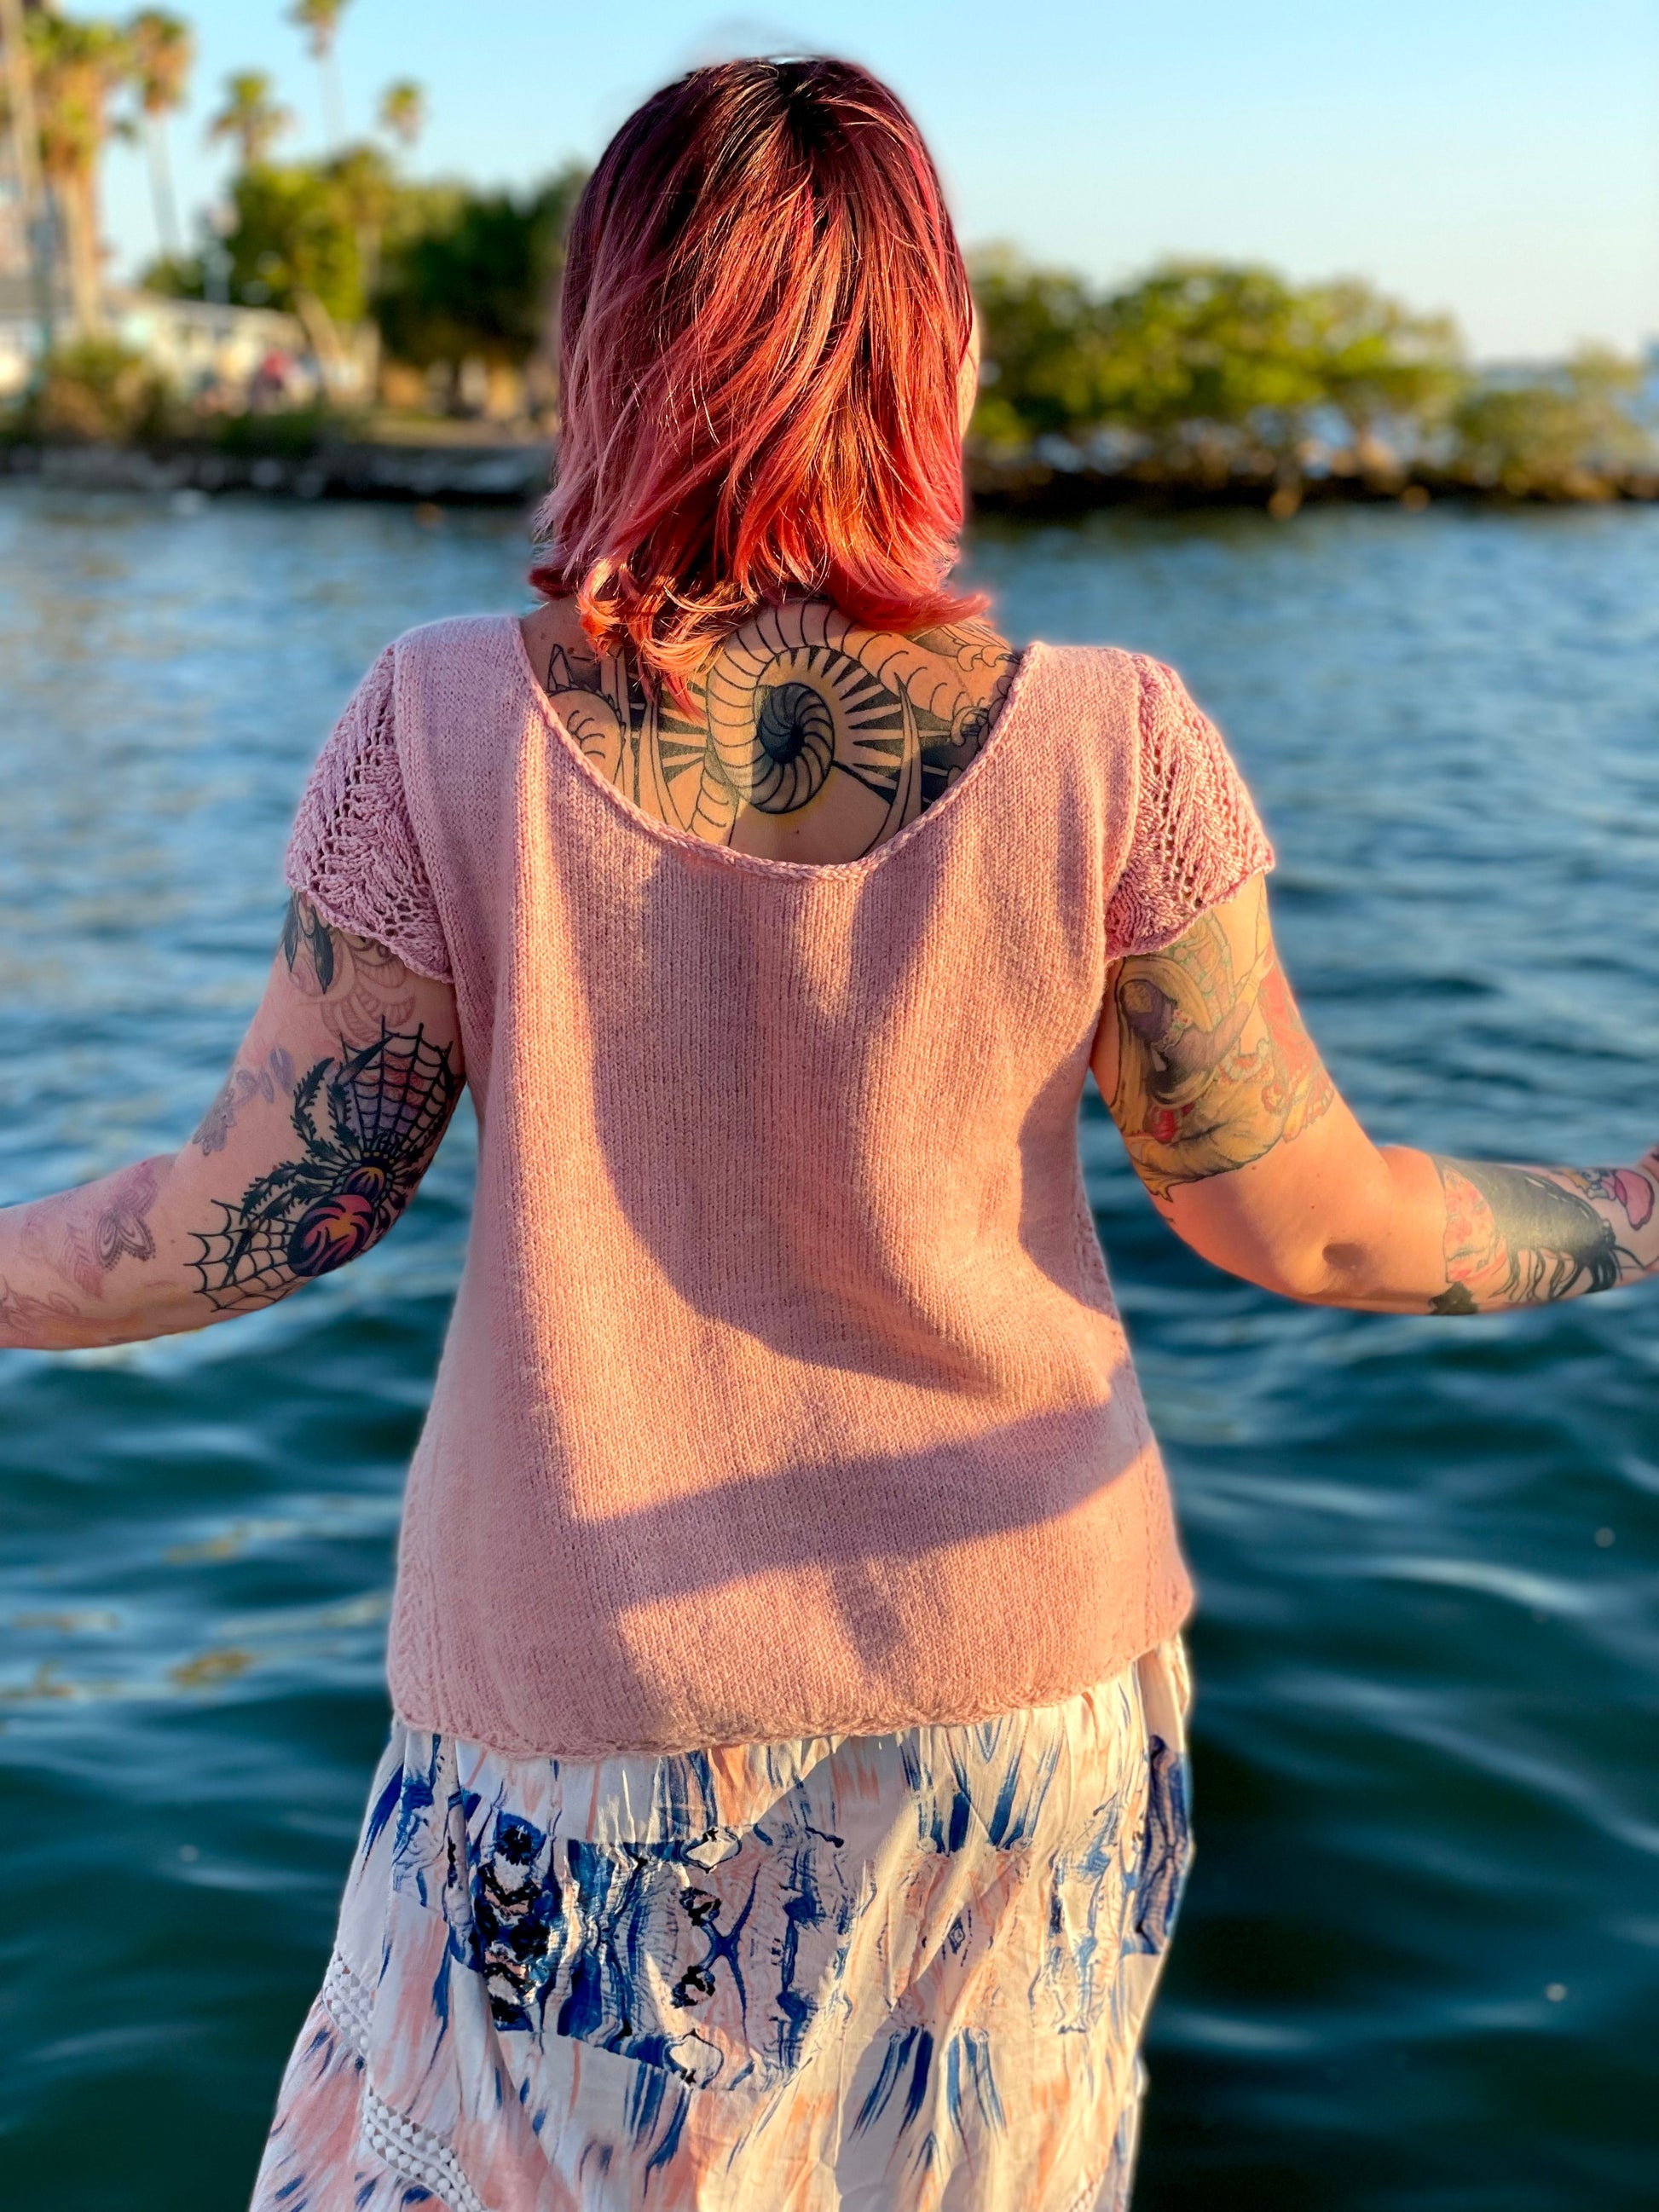 A white woman with rose gold hair and many visible tattoos stands on a docking facing away from the camera. She looks out over the water wearing a hand knit wool tee. The anna tee knitting pattern features lace cap sleeves, generous positive ease and a scooping front and back neckline.